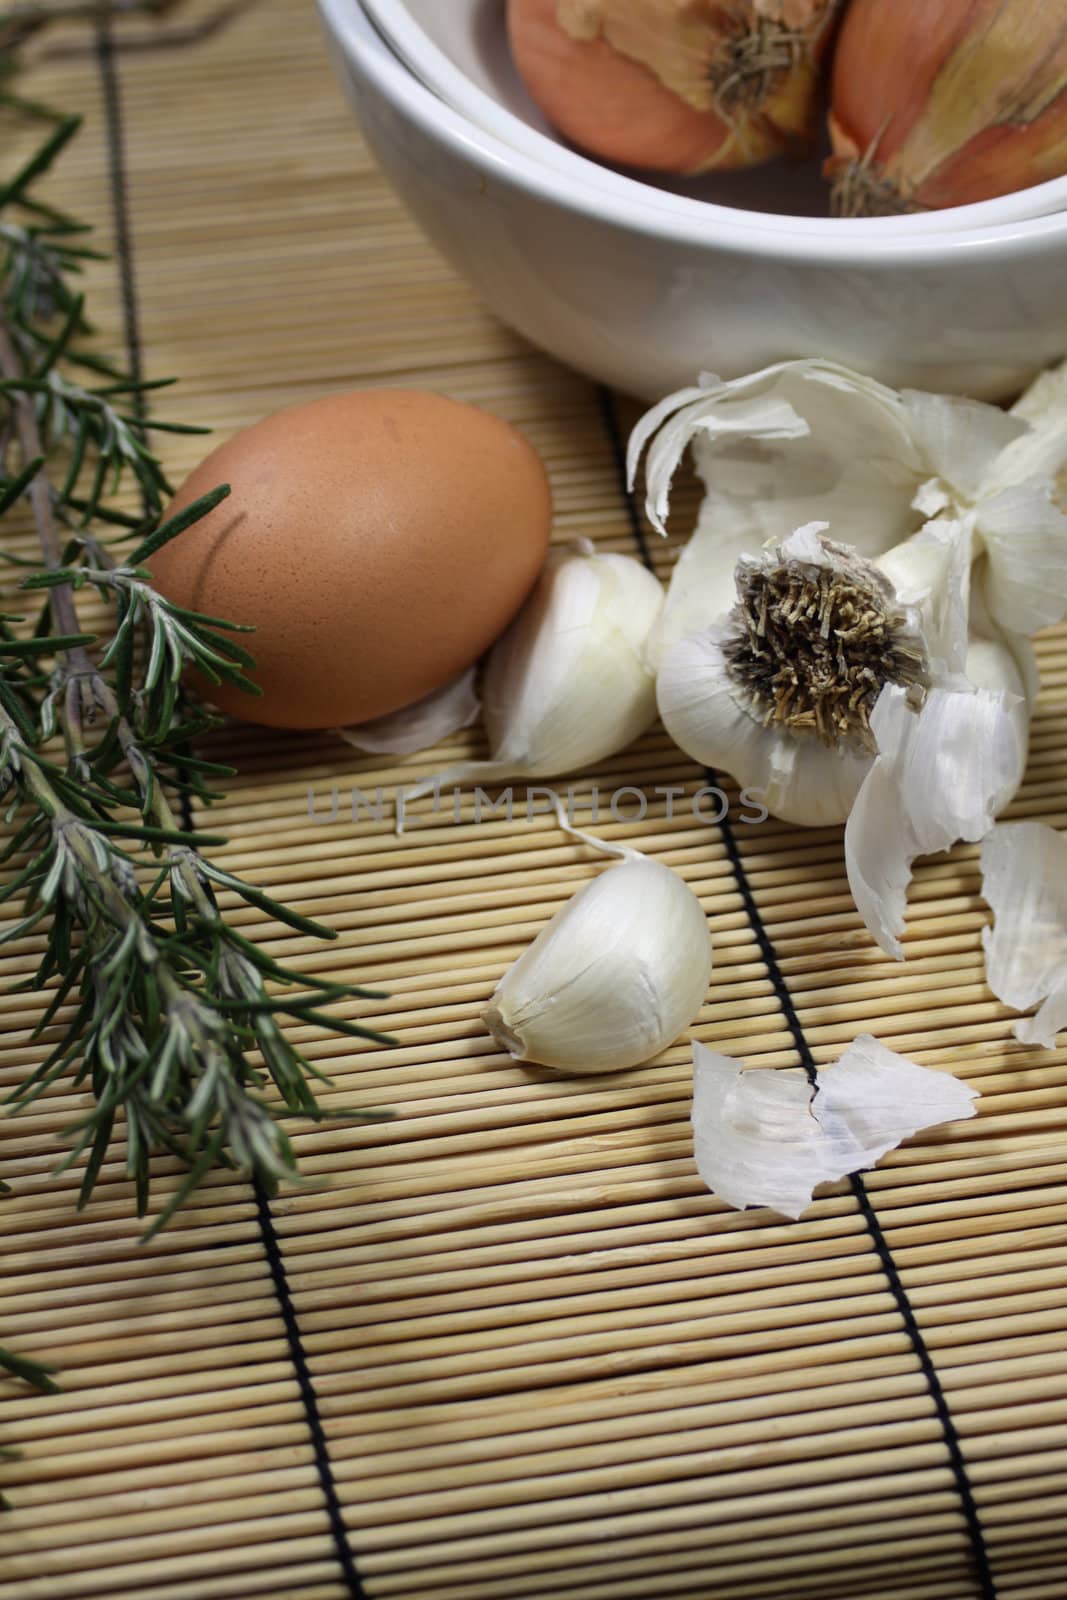 Close up detail of food ingredients comprising of a single brown egg, a bulb of garlic and a sprig of rosemary. All set on a portrait format on a bamboo matting base.